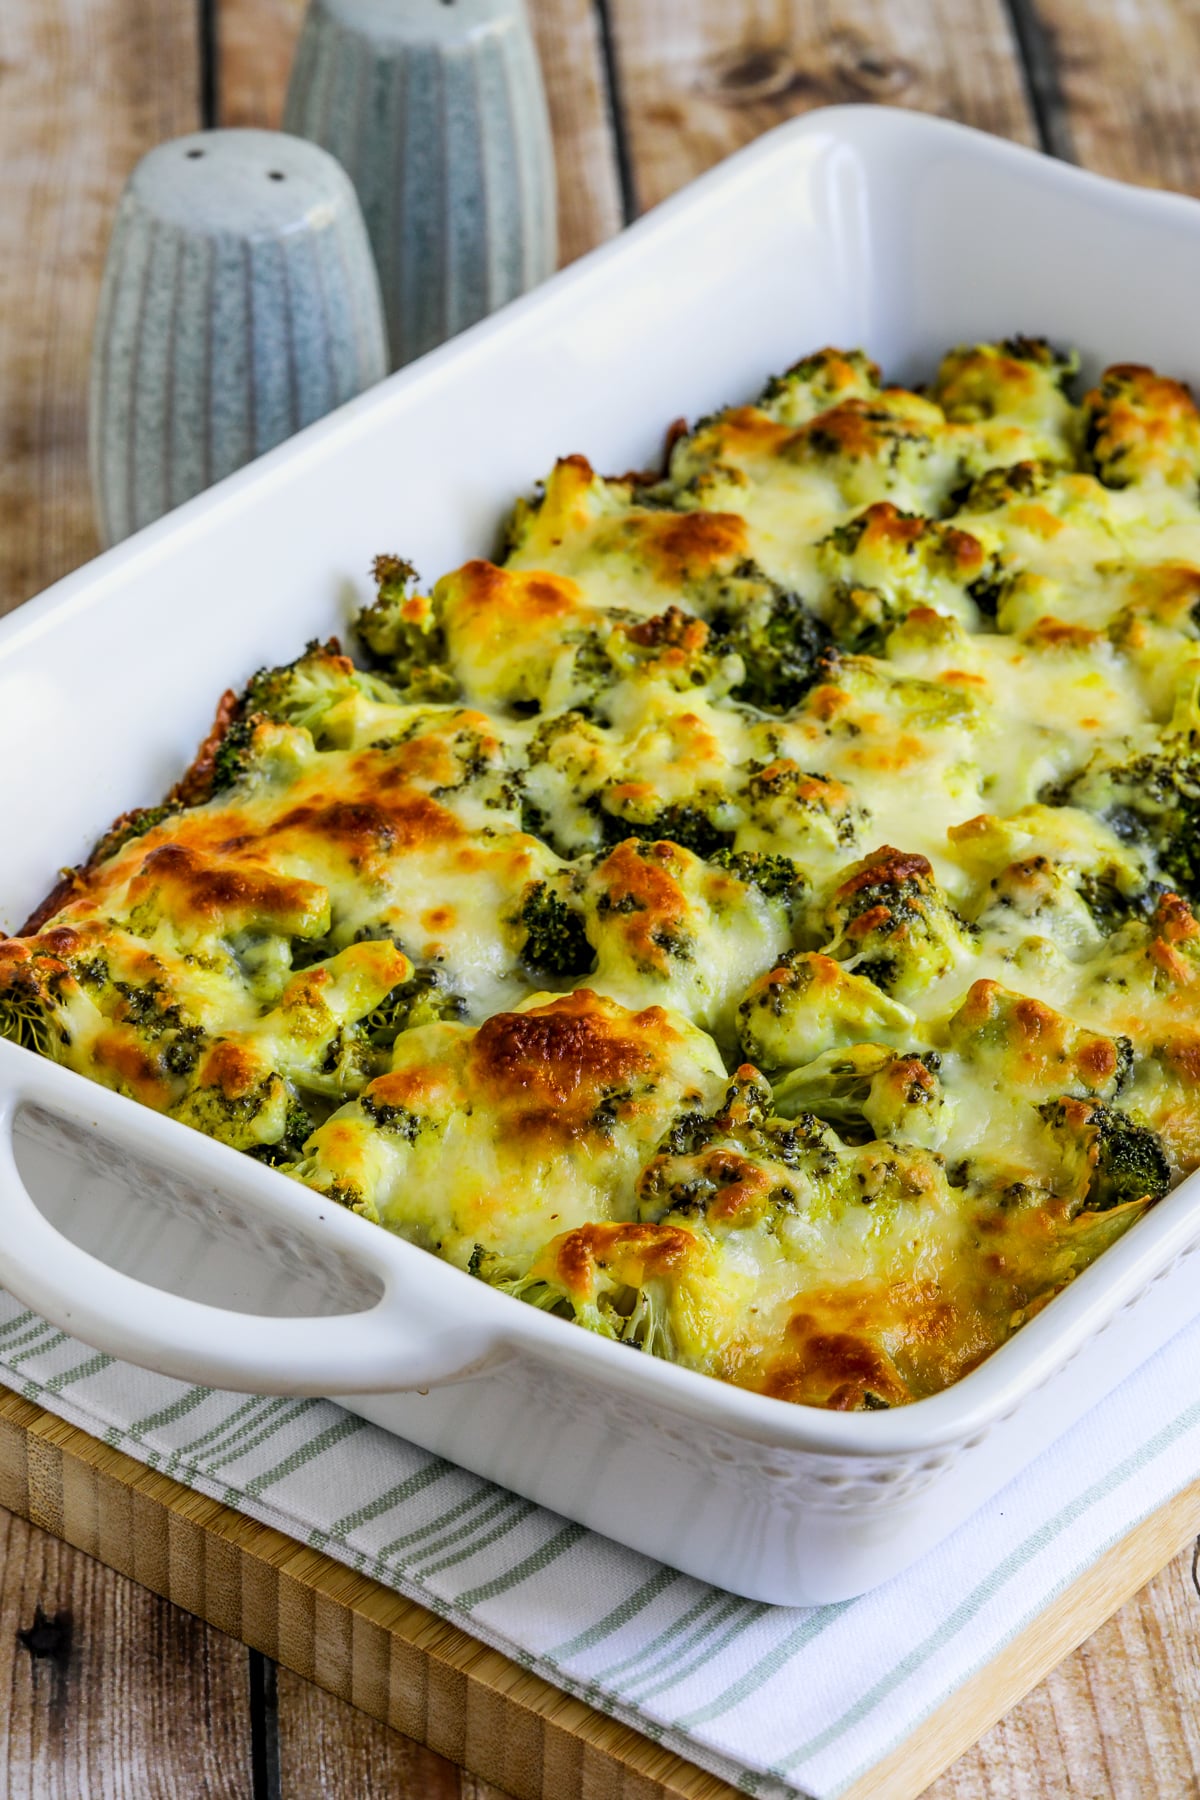 Broccoli and Rice Casserole shown in baking dish with melted cheese.